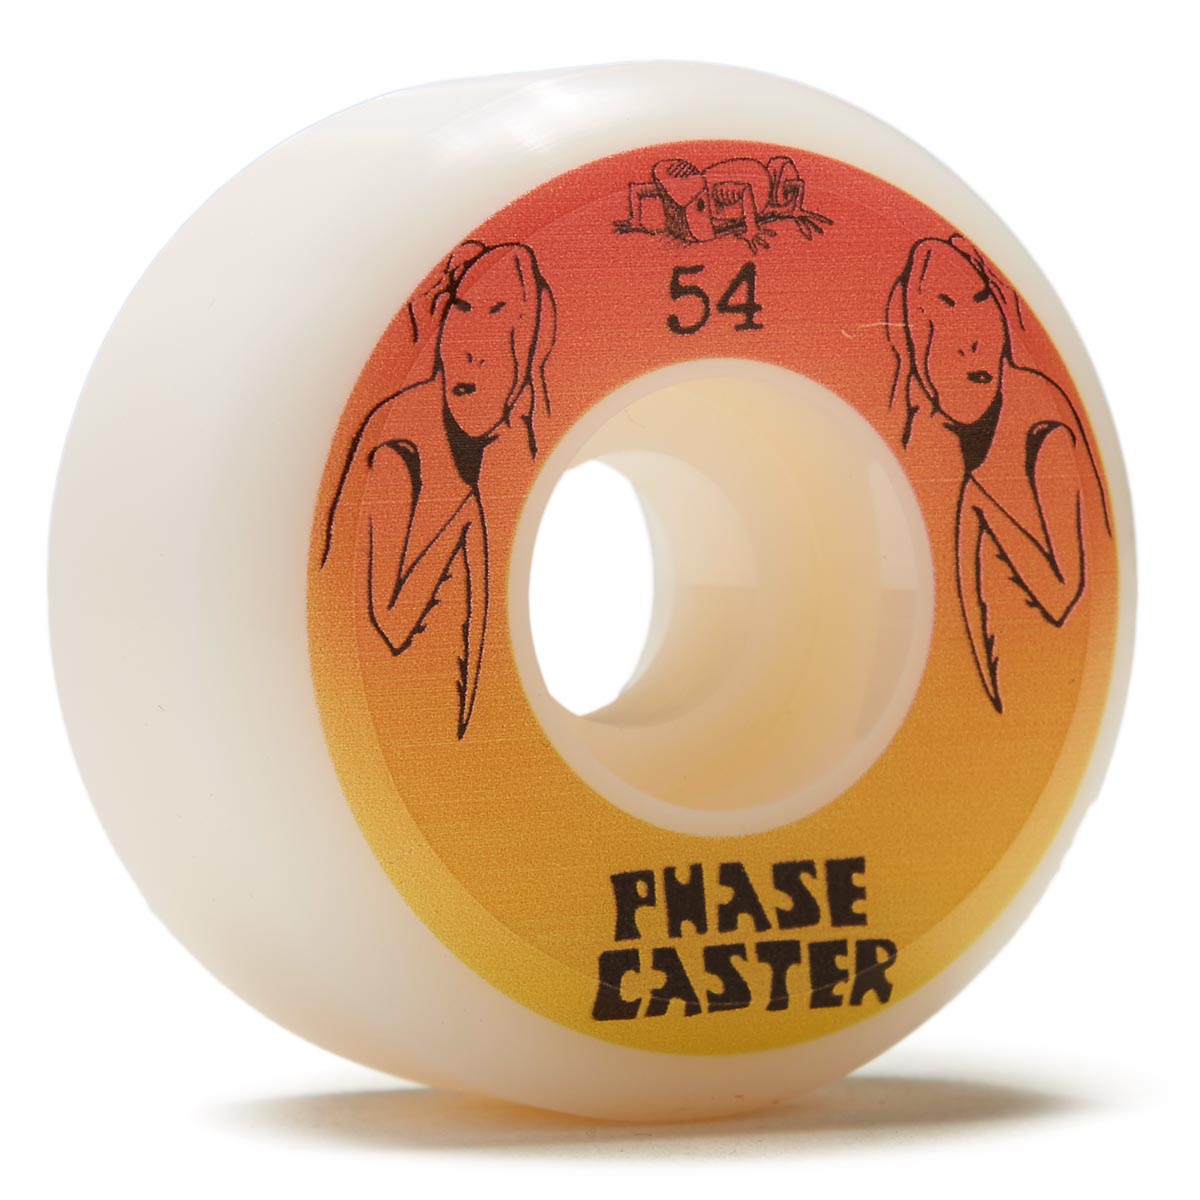 The Heated Wheel Phasecaster Mantis Man 100a Skateboard Wheels - 54mm image 1